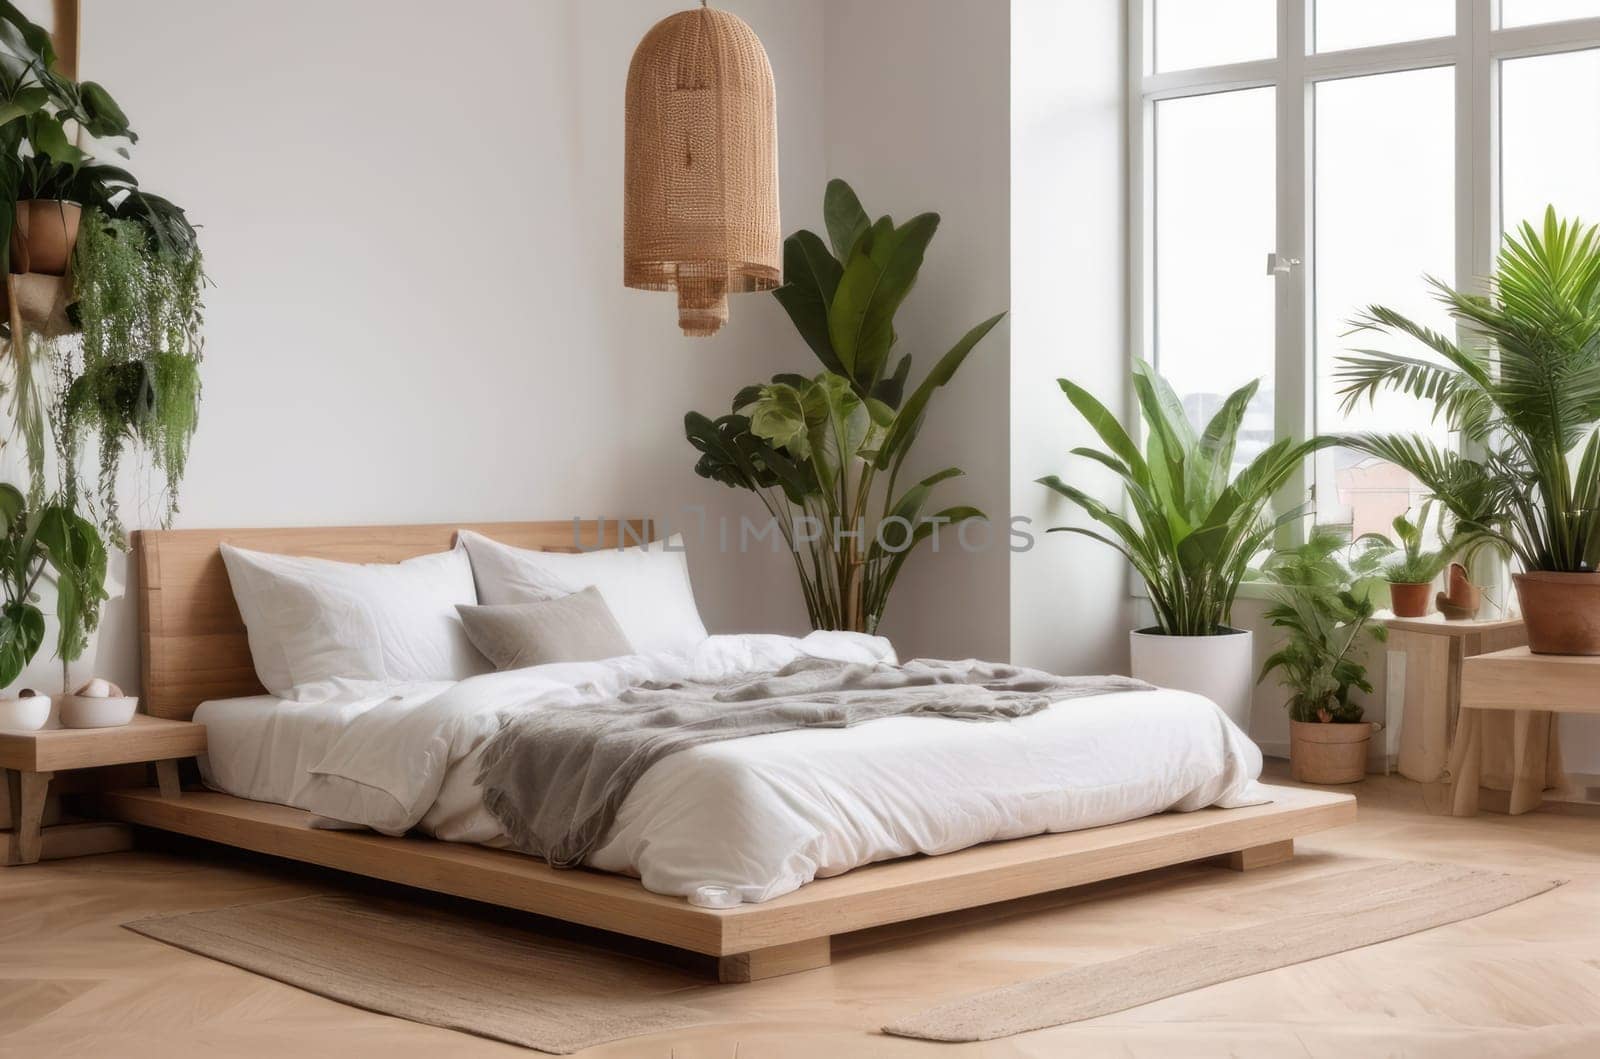 Interesting corner in a home garden, bedroom in light tones with wooden elements. Featuring: bed, parquet floor, and plenty of potted houseplants. Urban jungle interior design. Biophilia concept